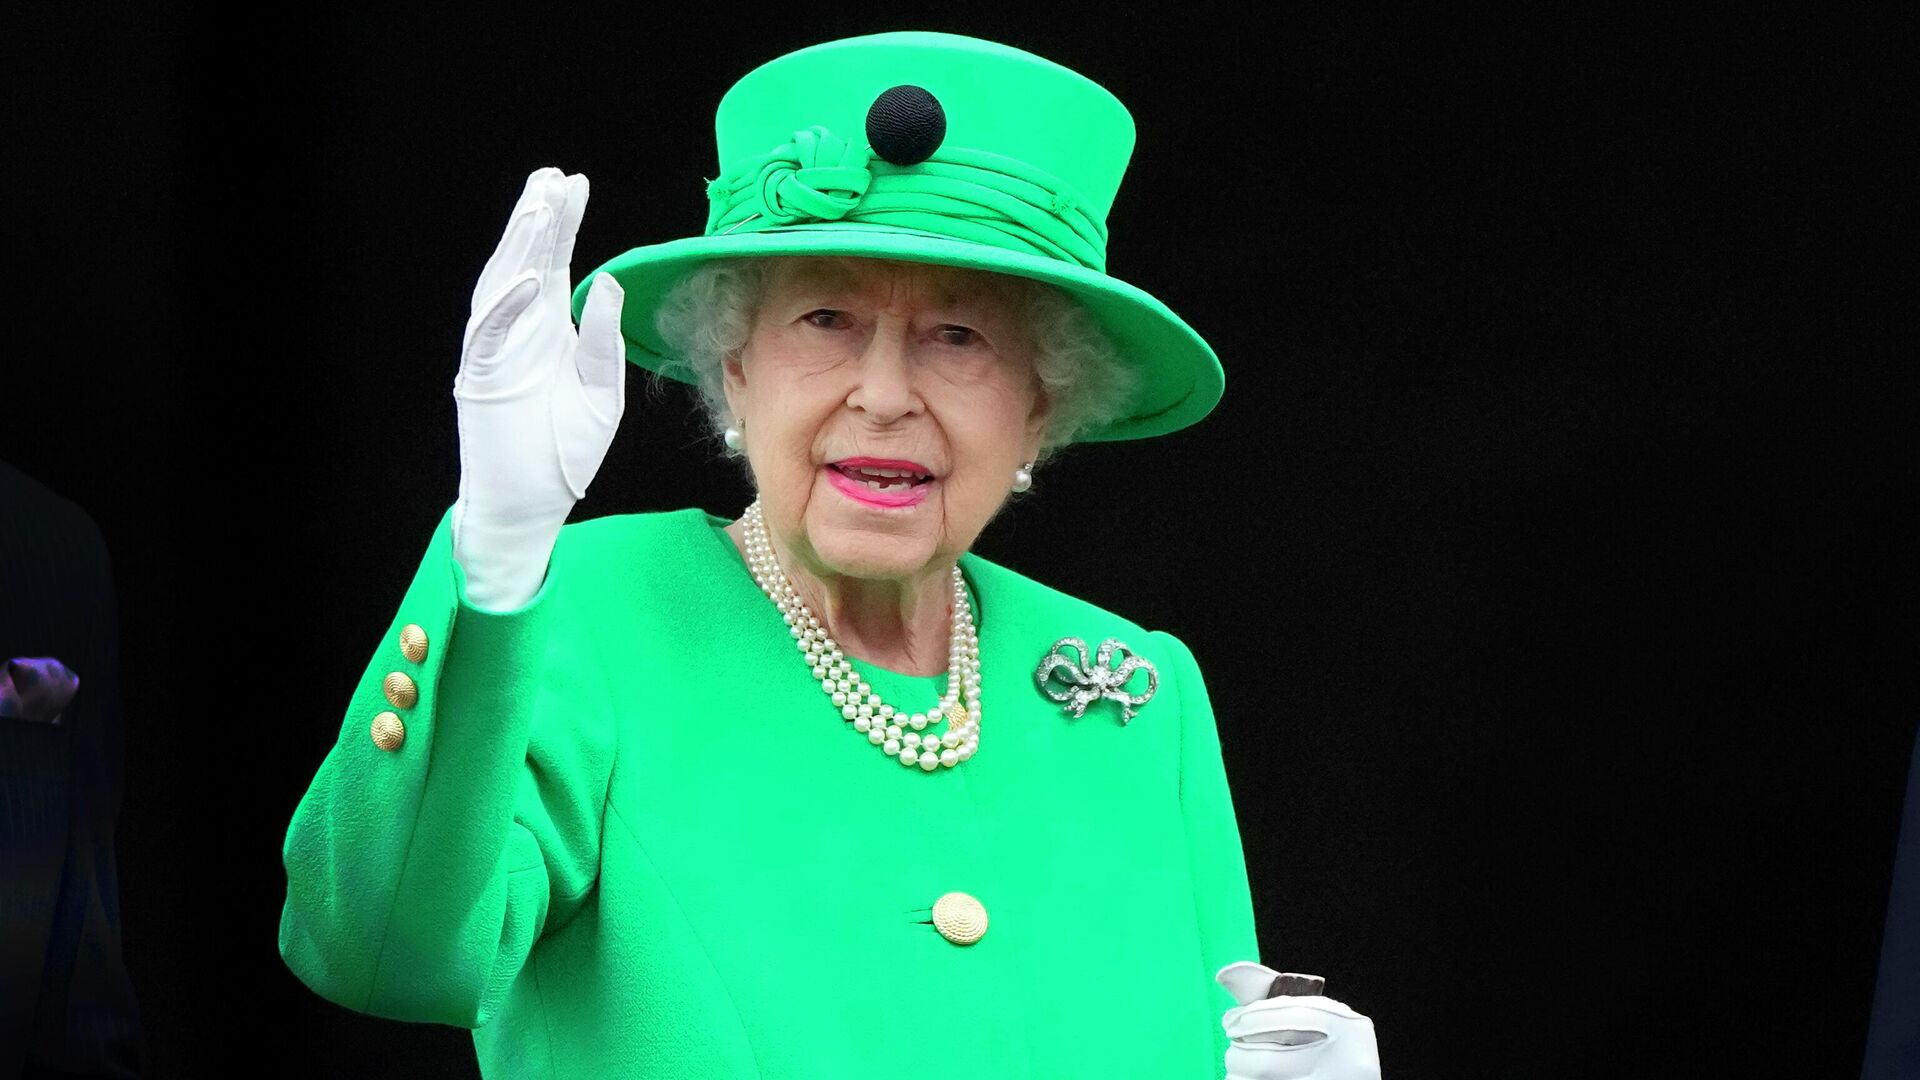 Britain's Queen Elizabeth II waves to the crowd during the Platinum Jubilee Pageant at the Buckingham Palace in London, Sunday, June 5, 2022, - Sputnik International, 1920, 02.08.2022